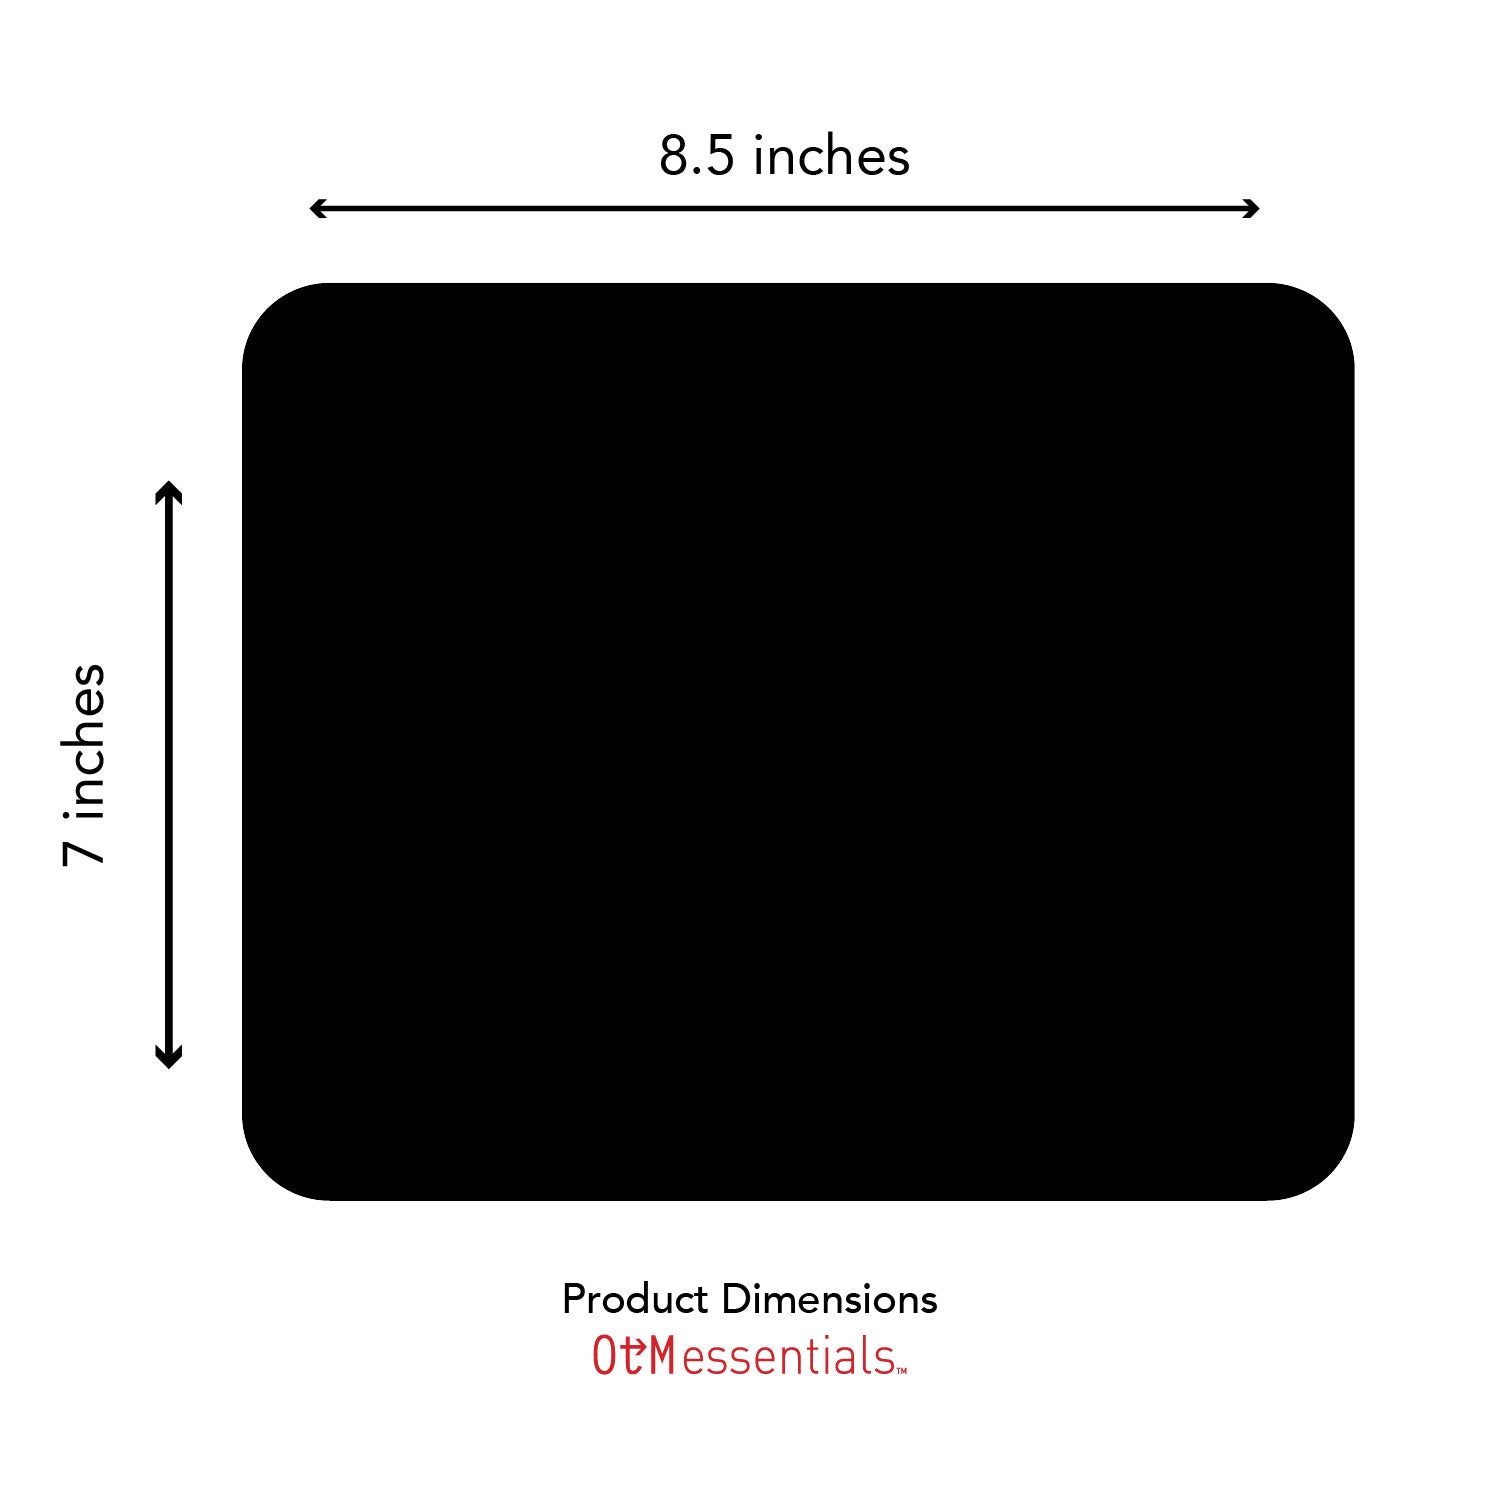 OC-UOF-MH26A, Product Dimensions